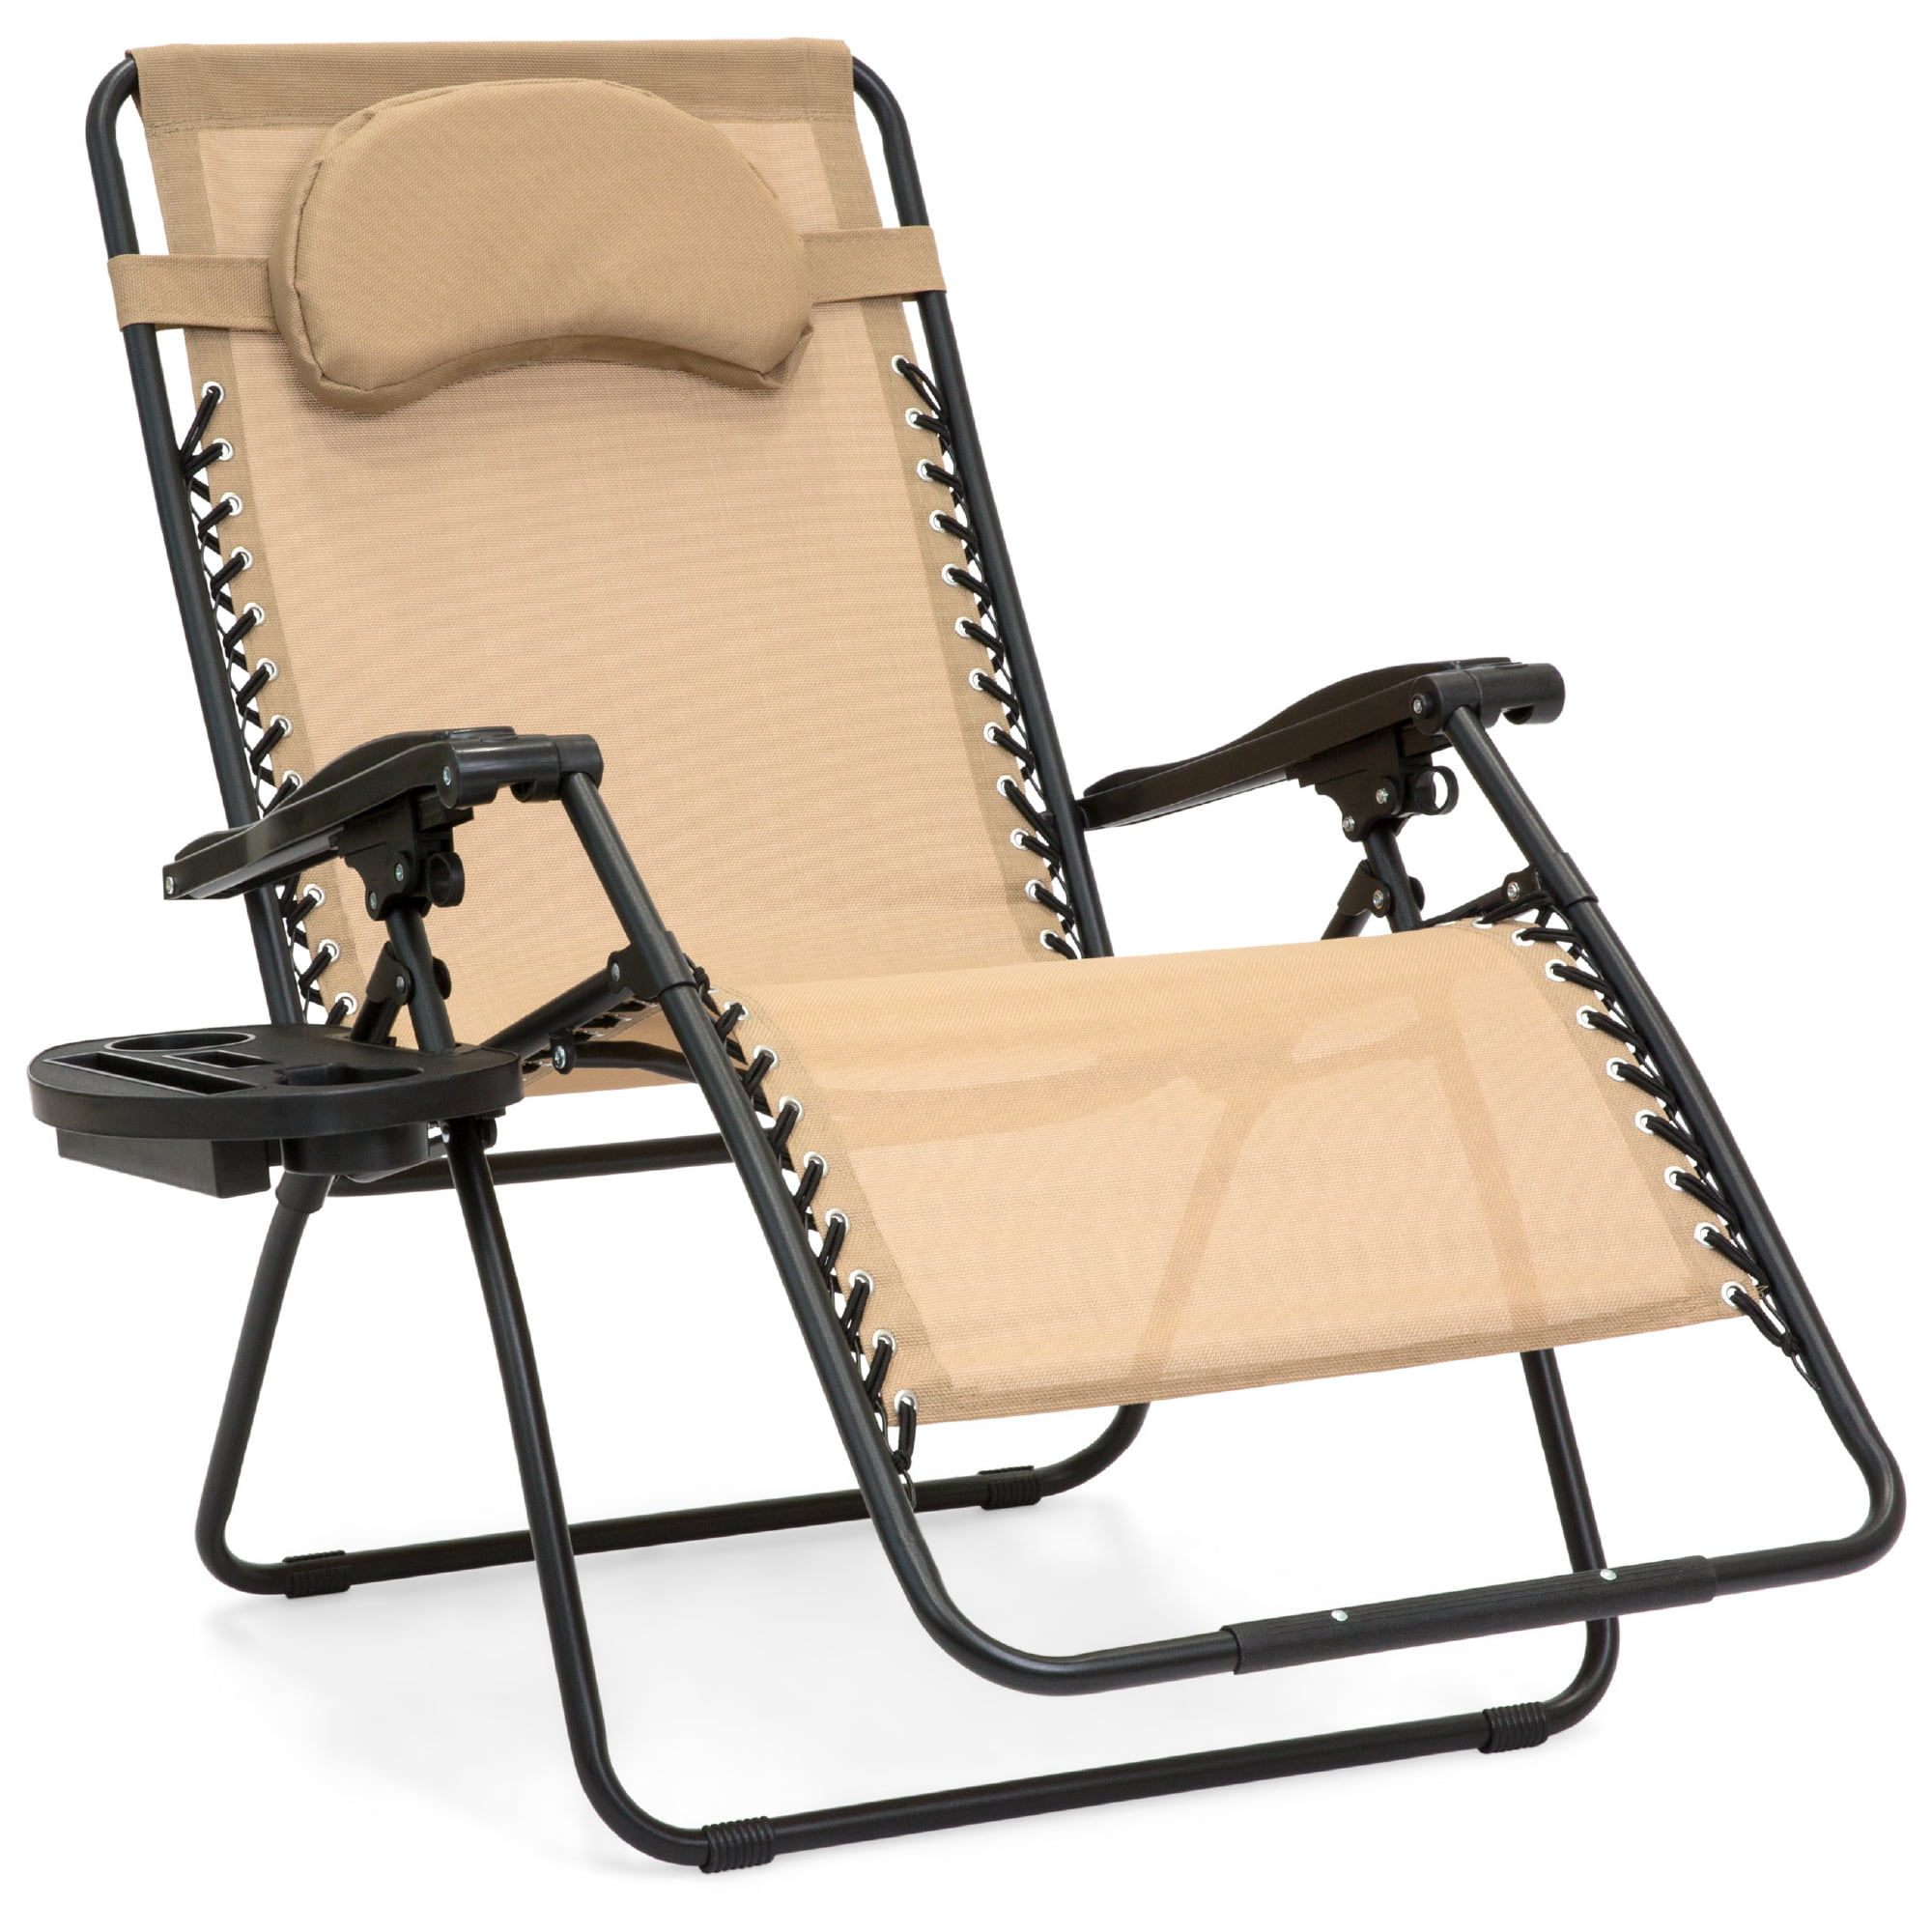 Best Choice S Oversized Zero, Oversized Zero Gravity Chair With Cup Holder